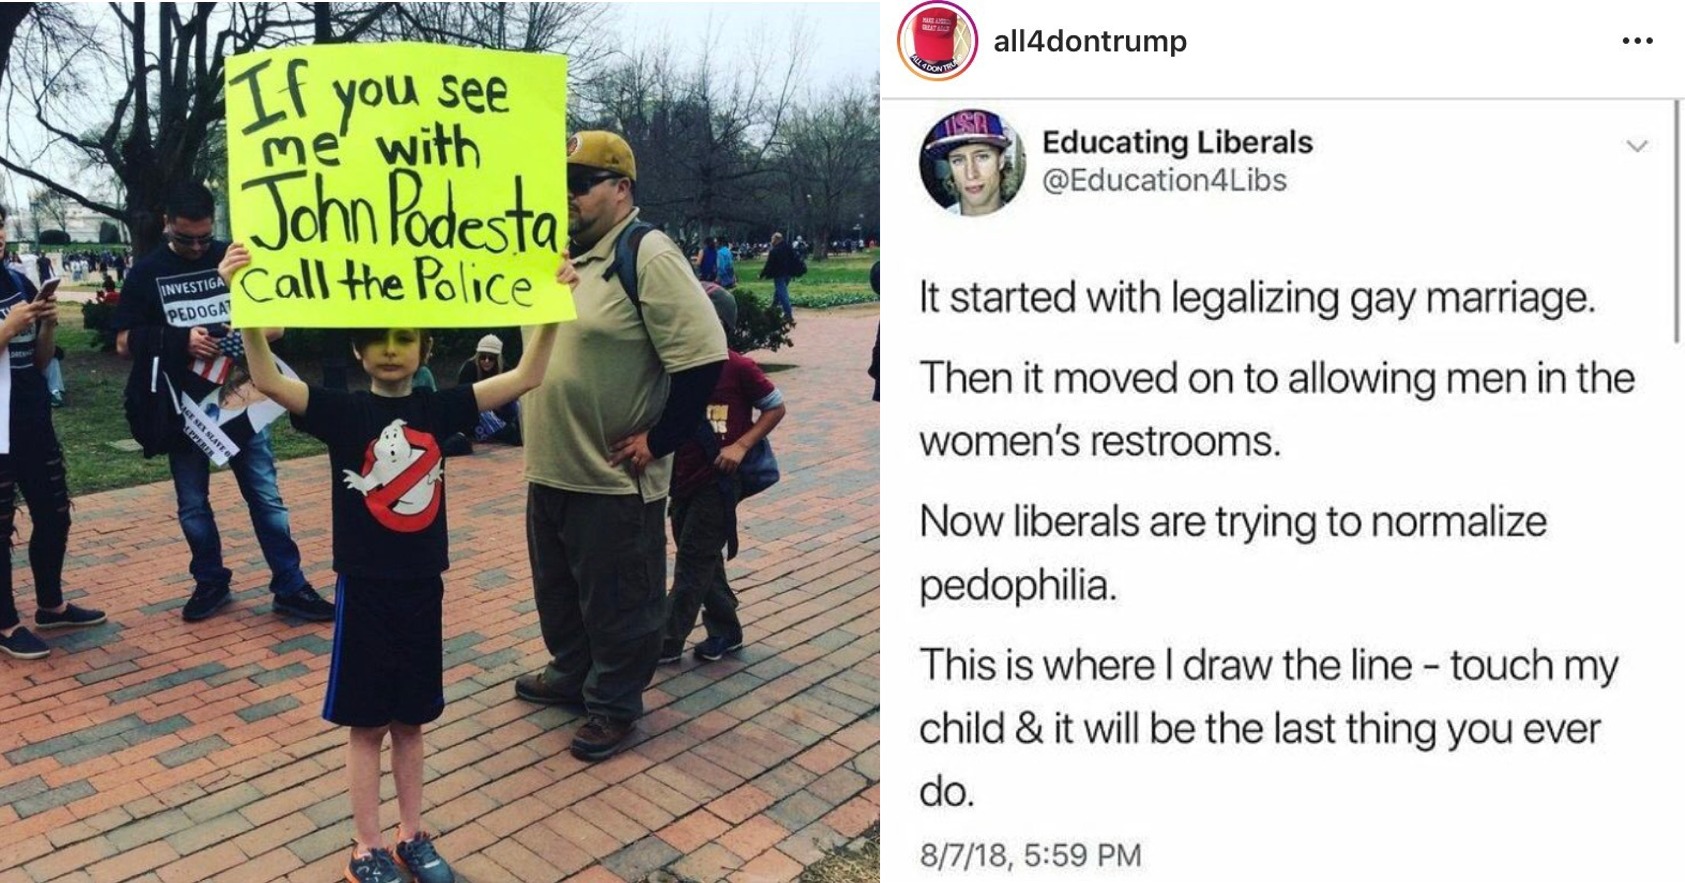 kid protest - all4dontrump Ymas "If you see me' with John Podesta escu call the Police Educating Liberals Investiga Pedoga Use Sex Slave It started with legalizing gay marriage. Then it moved on to allowing men in the women's restrooms. Now liberals are t